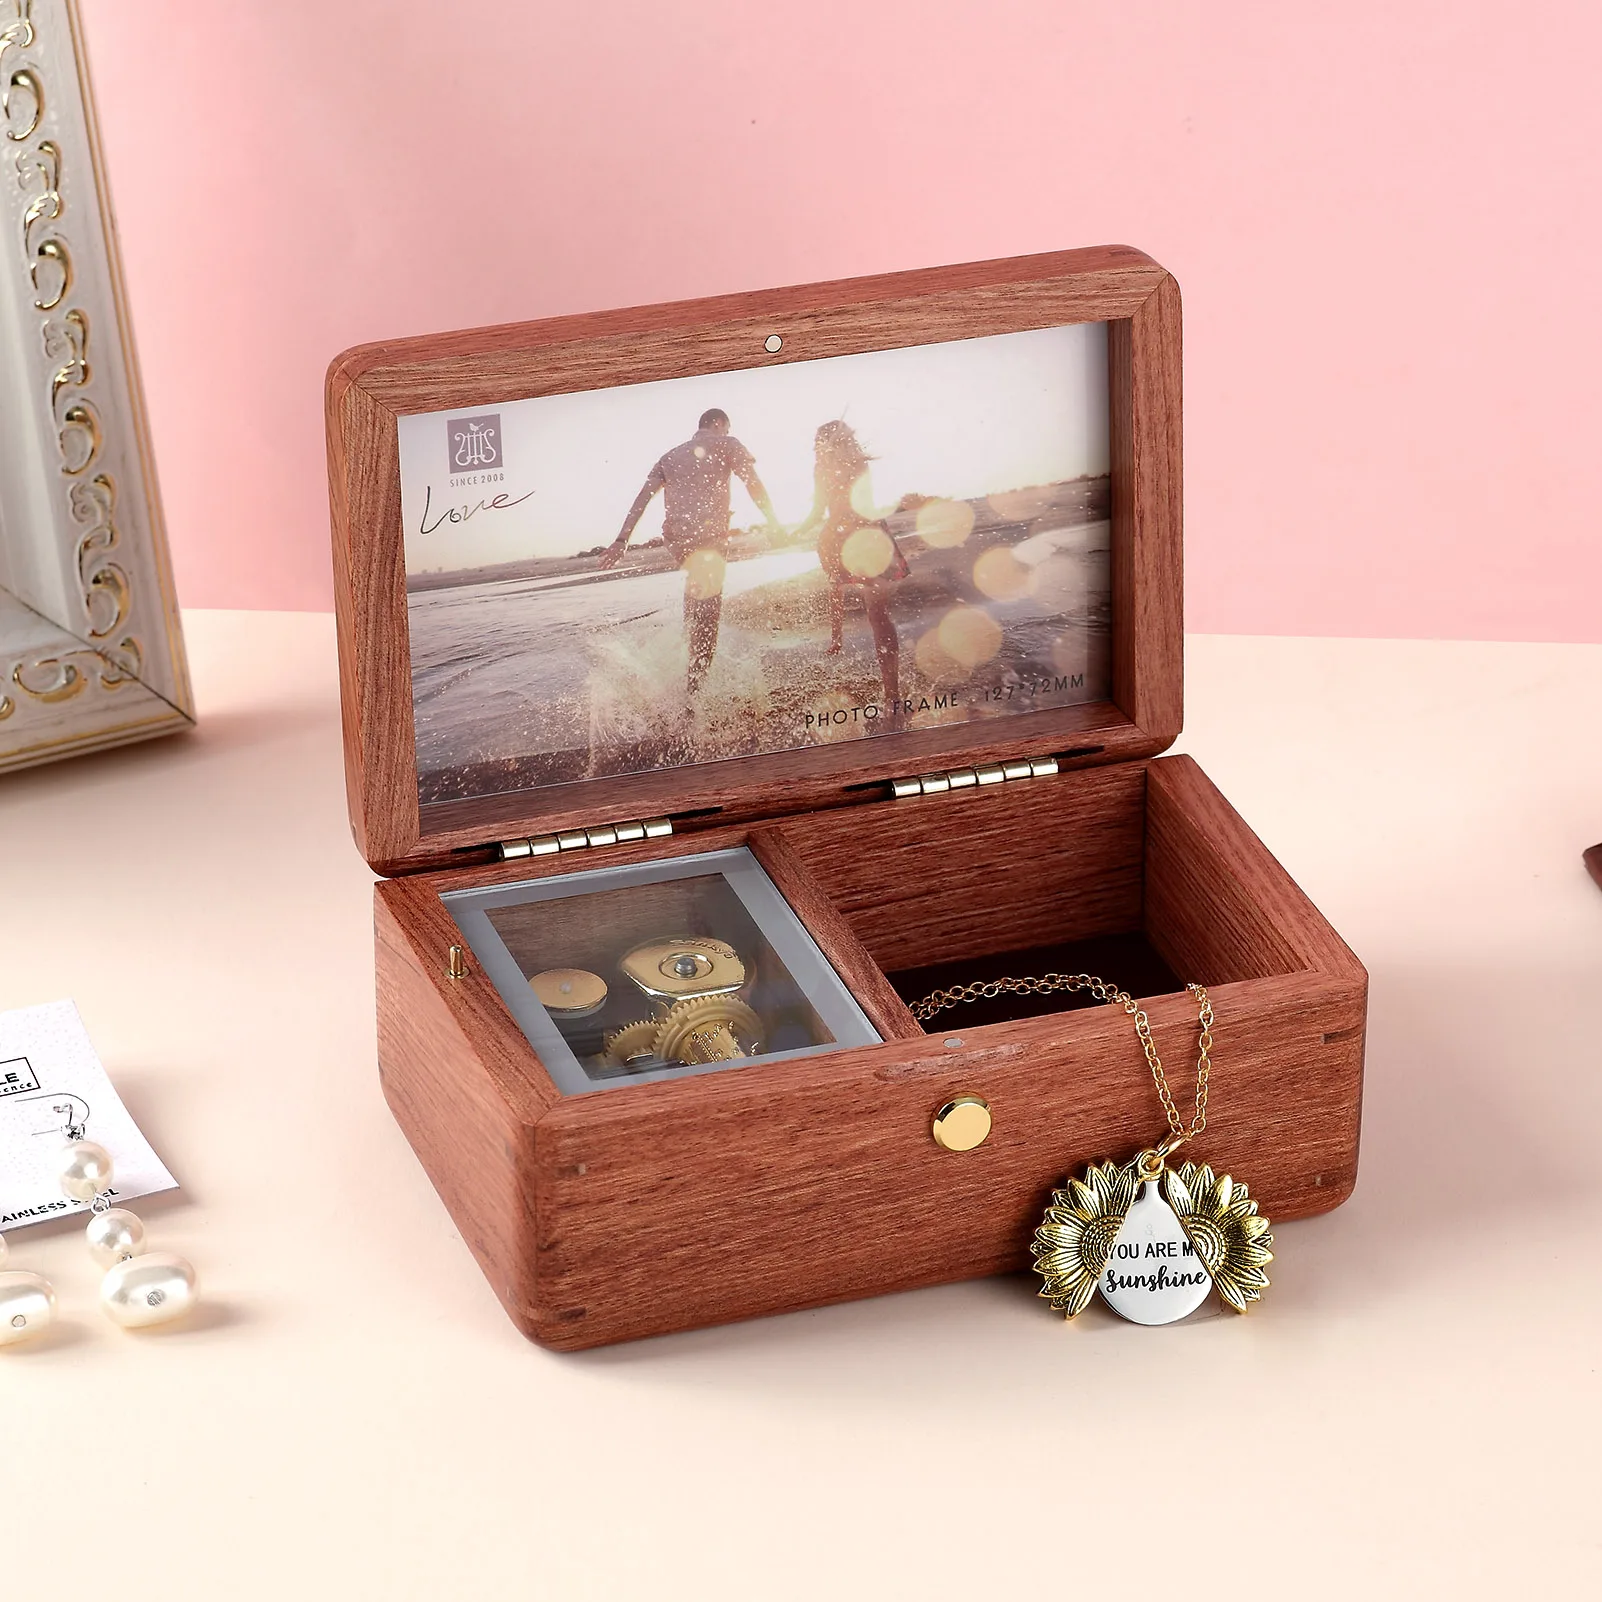 

SOFTALK My heart will go on Solid Wood wooden box Music Box Birthday, Christmas, Valentine's Day Gift